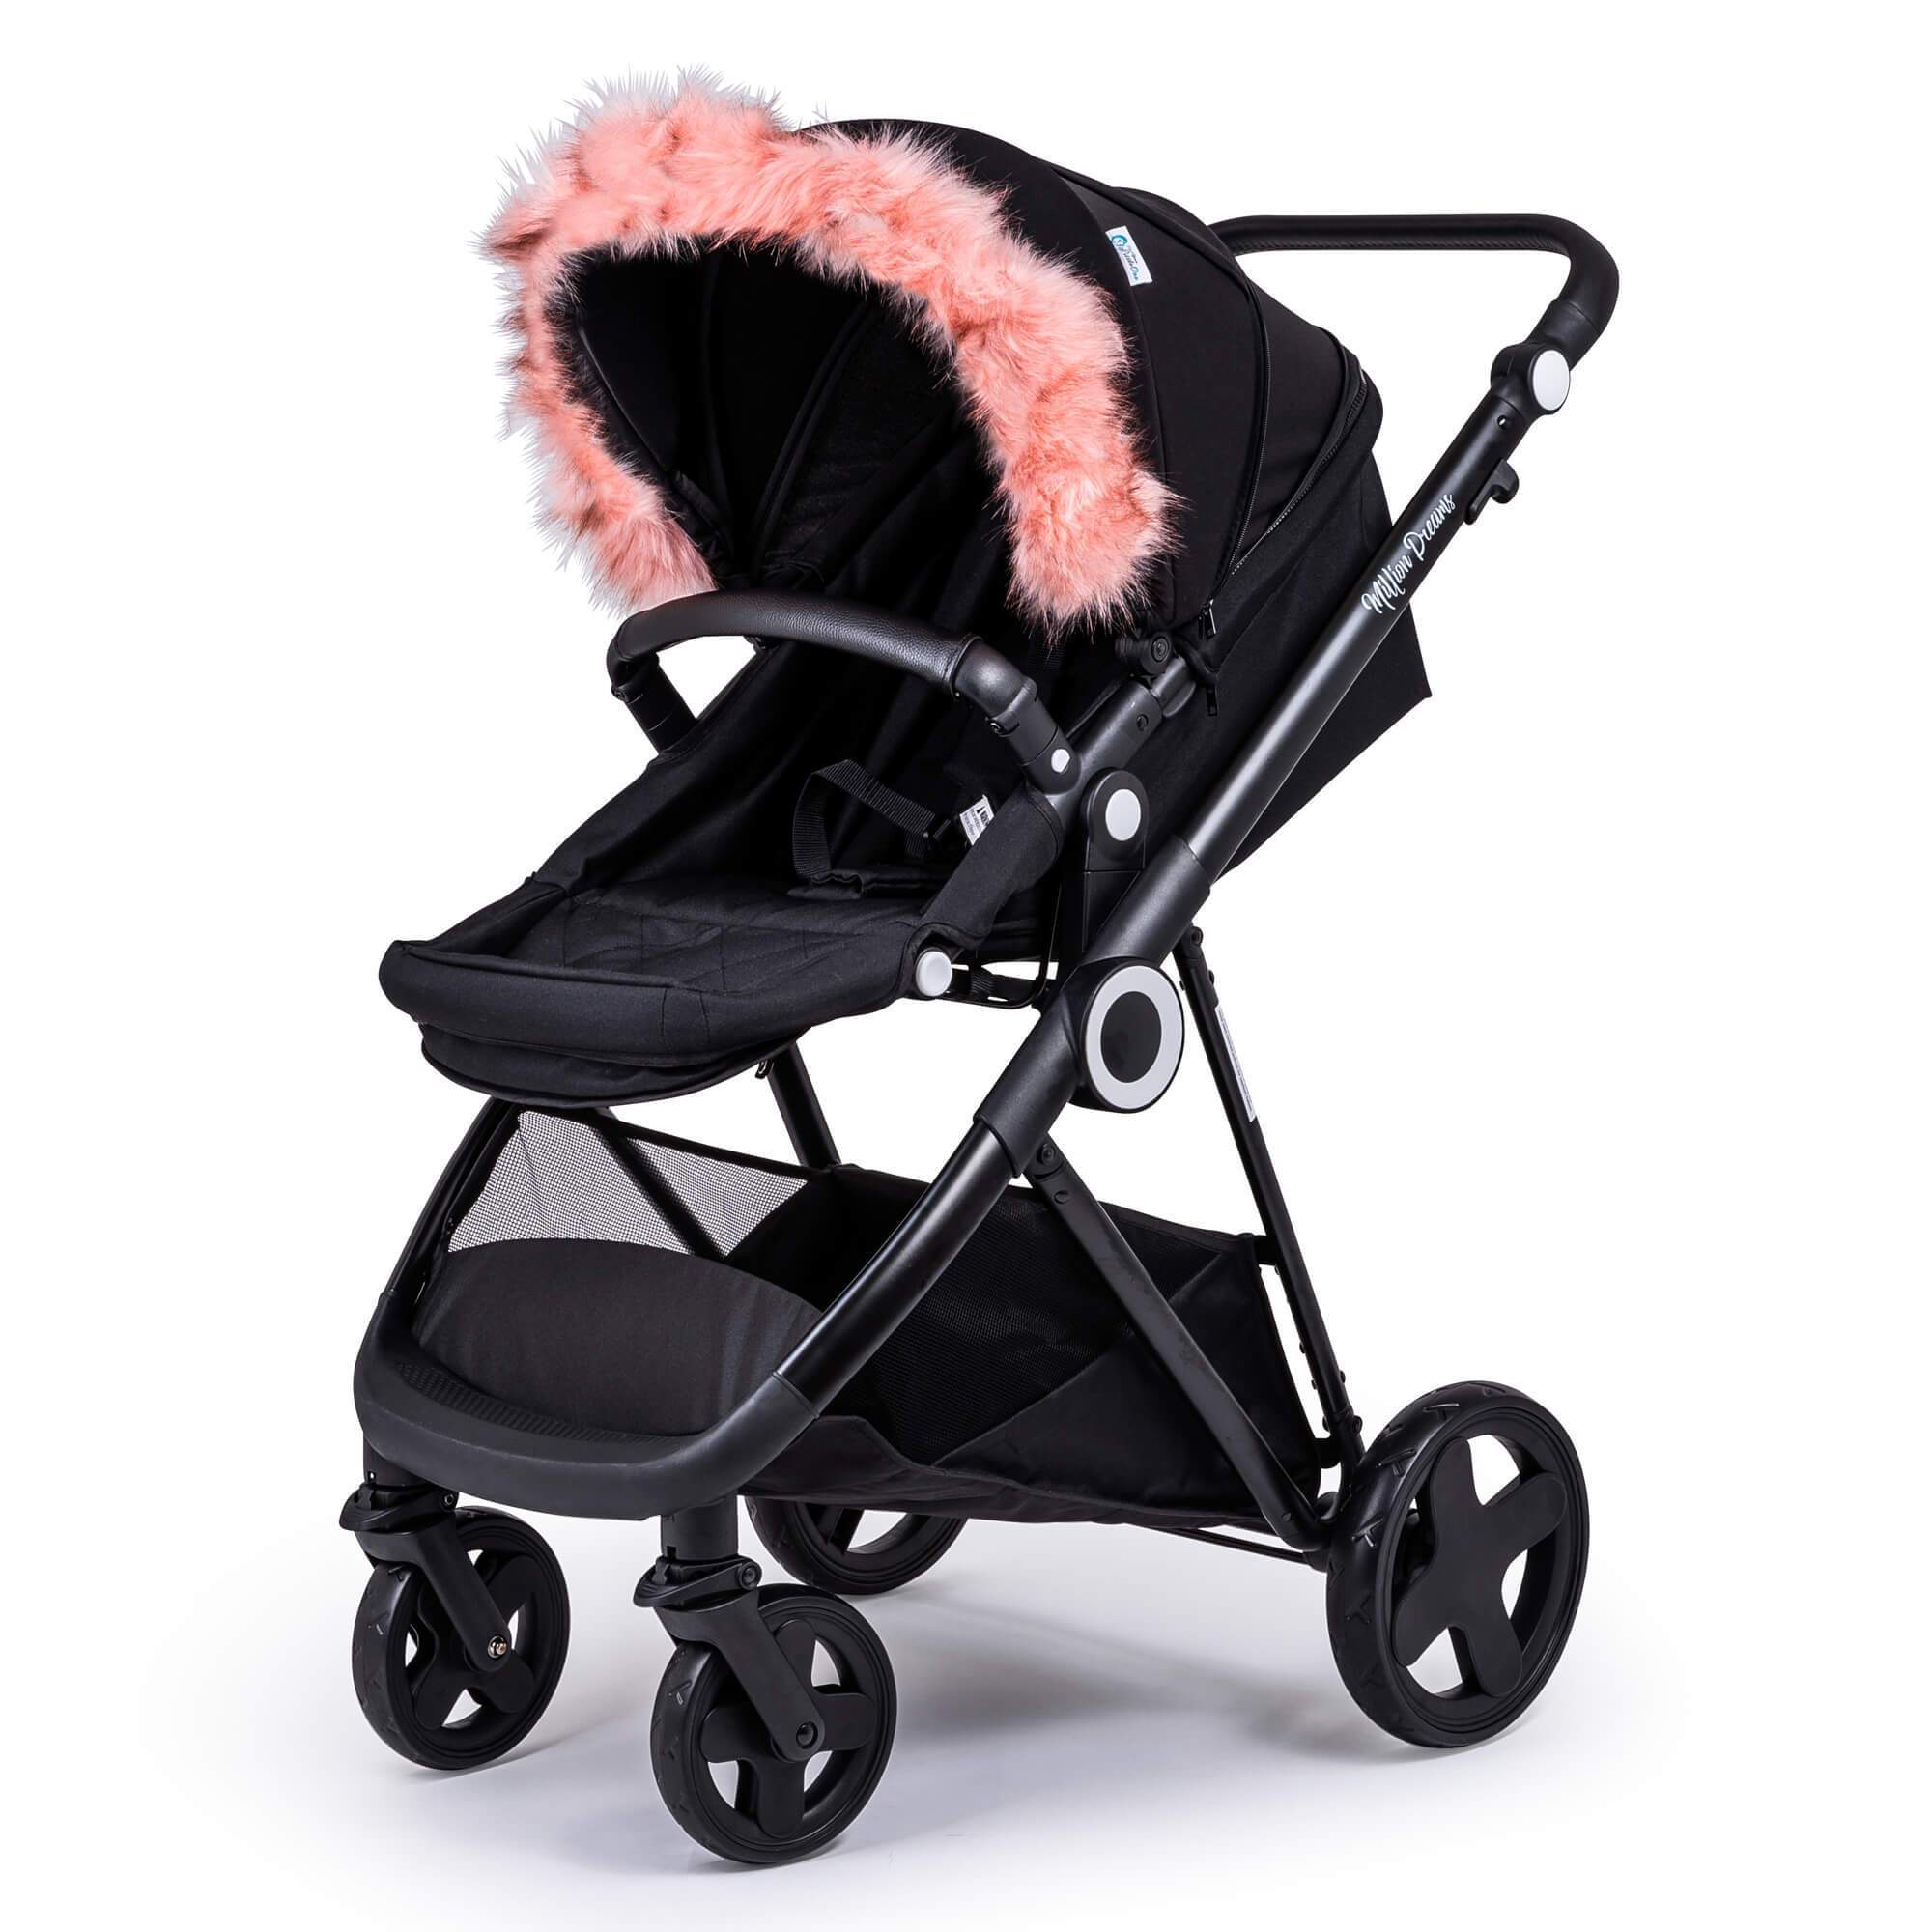 Pram Fur Hood Trim Attachment For Pushchair Compatible with Kinderkraft - Pink / Fits All Models | For Your Little One